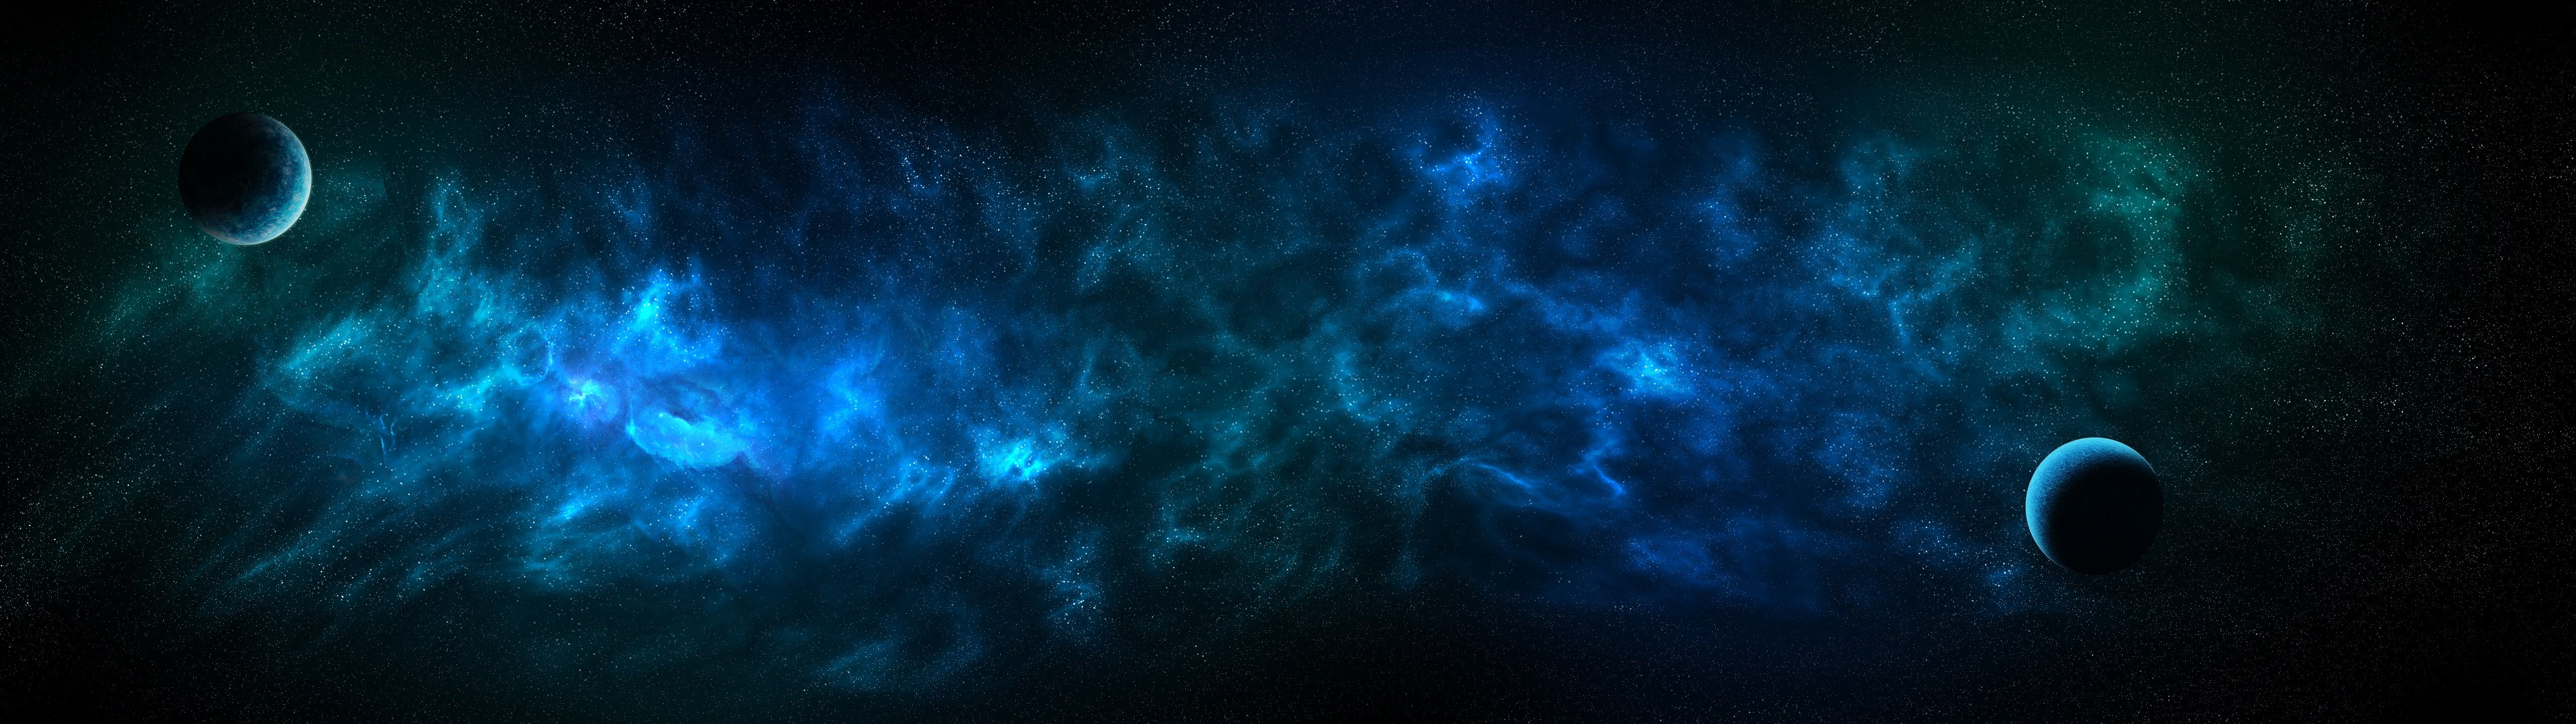 A panoramic view of a deep space nebula - 5120x1440